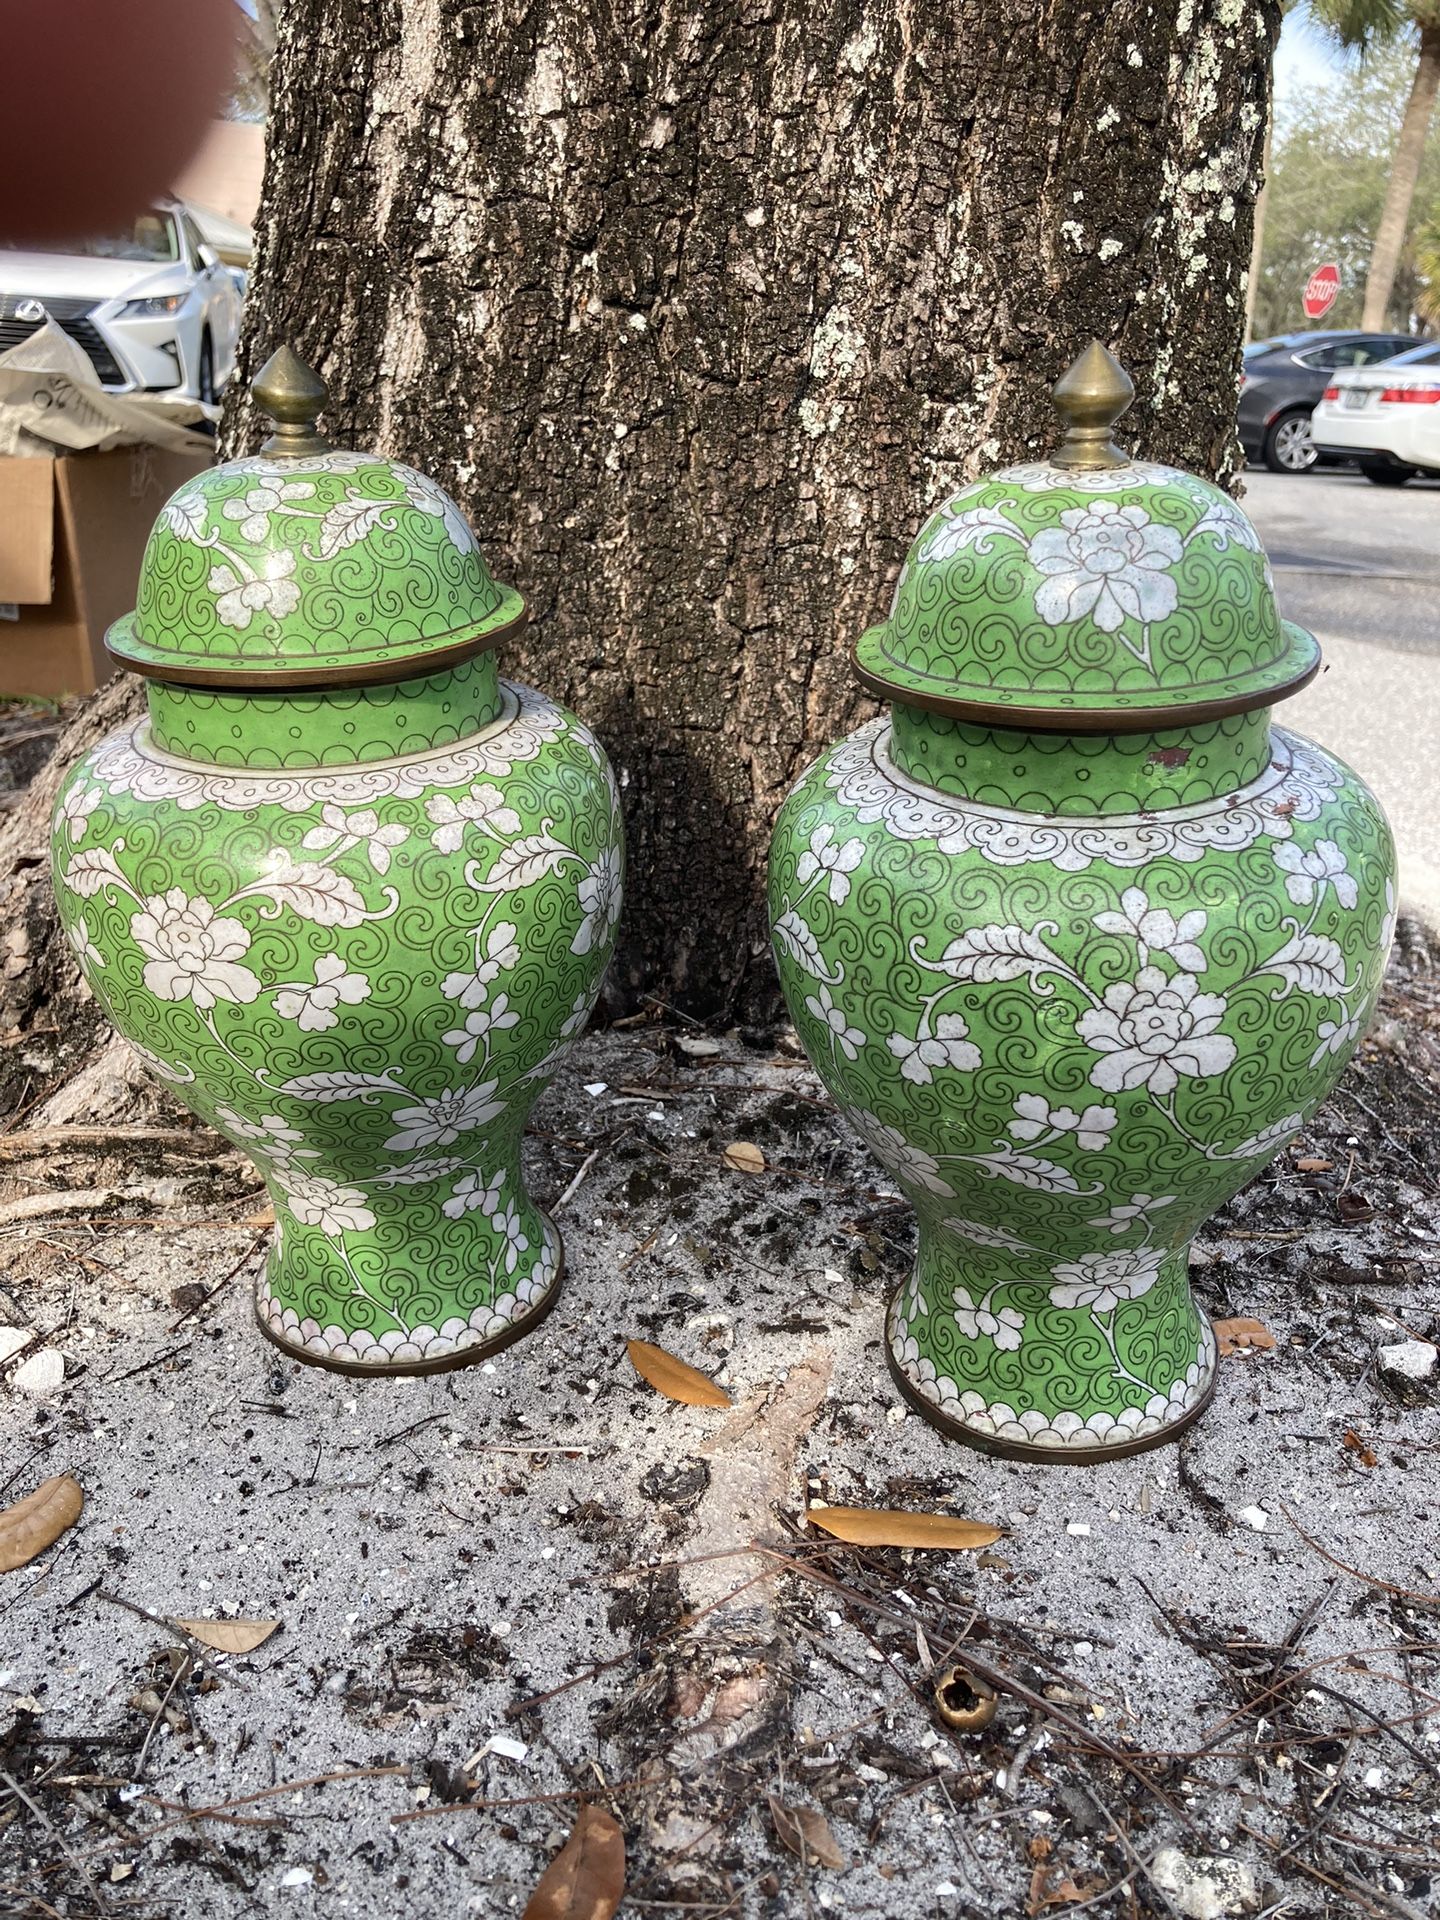 2 Asian Chinese Chinoiserie Cloisonné Ginger Jars. Green & White Enamel With Blue Interiors.  Beautiful Antiques Stamped CHINA. Good Condition. PAIR! 